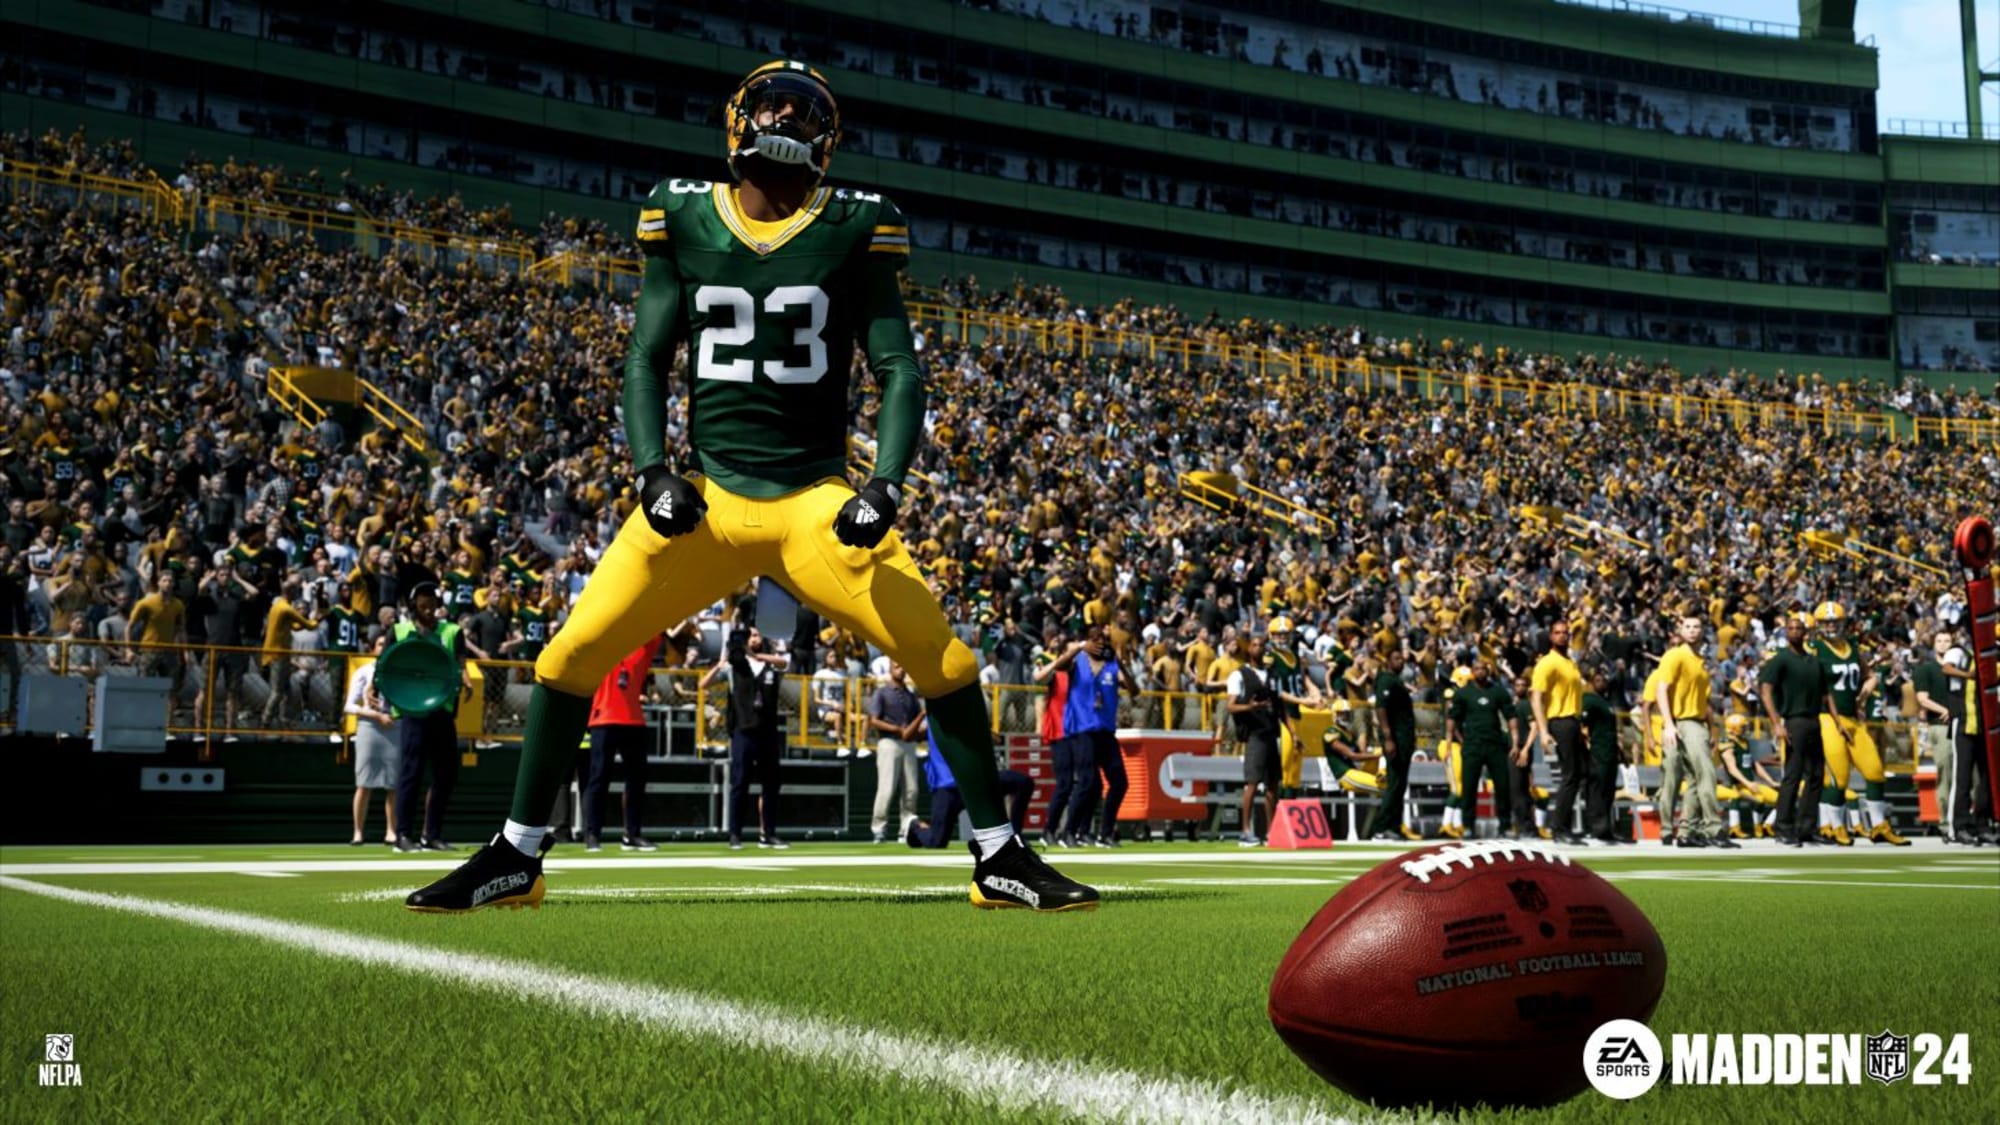 Is Madden 24 available for free on Xbox Game Pass at launch?